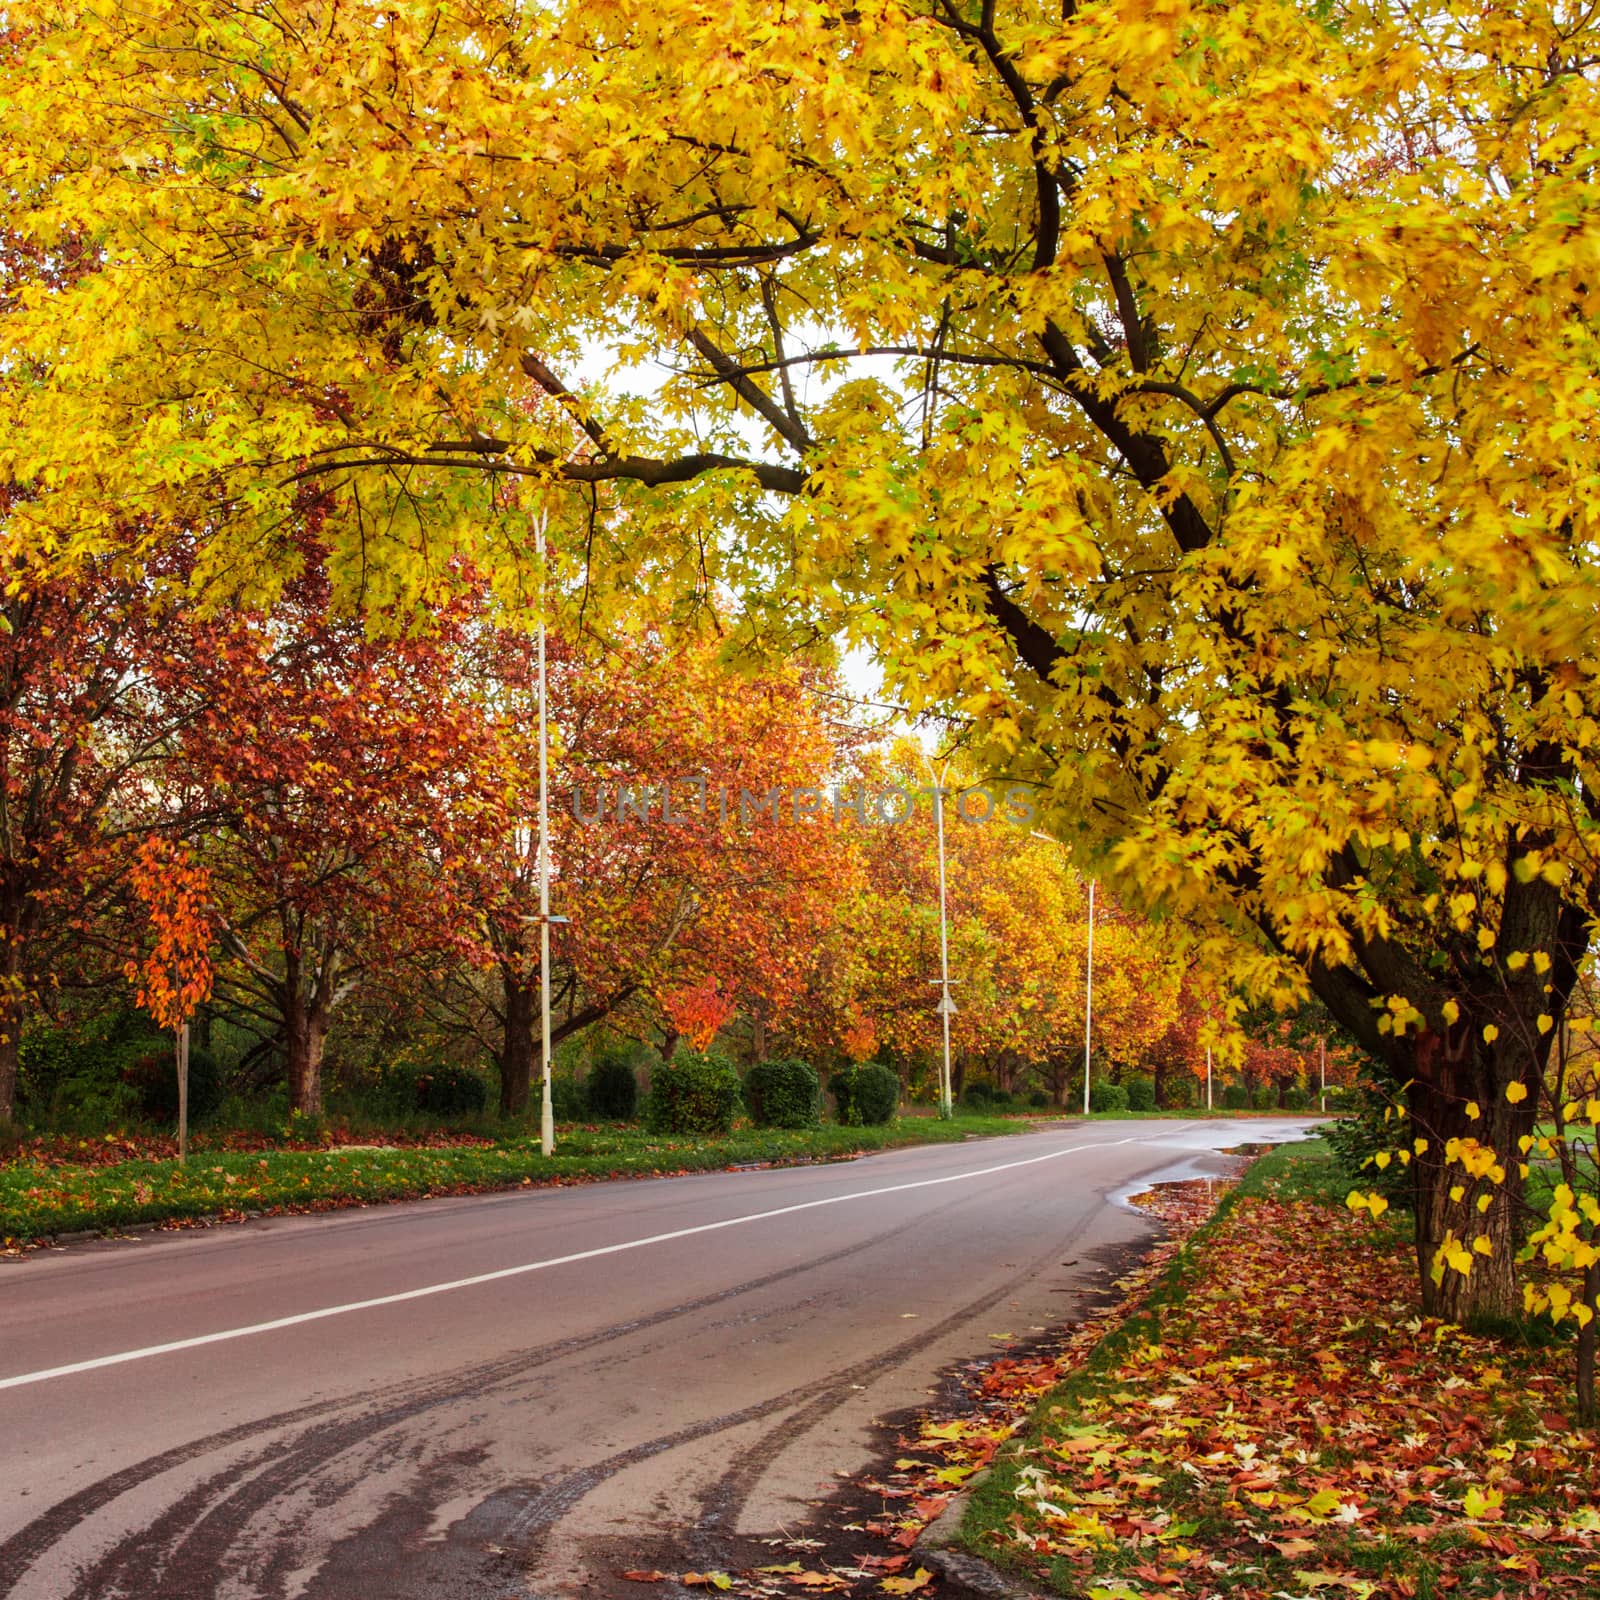 Autumn landscape with road and yellow and red leaves